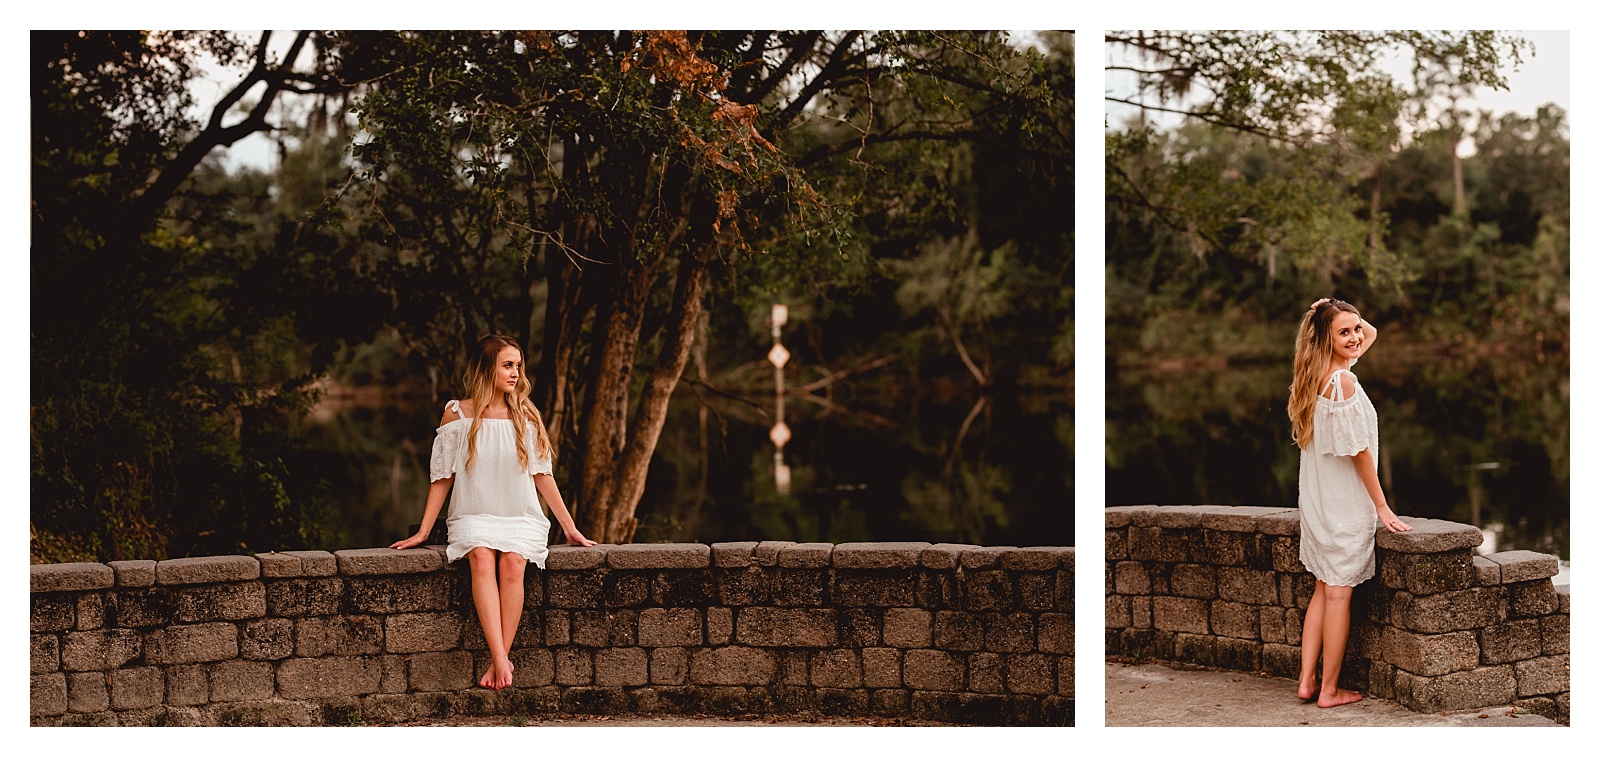 Professional senior portraits at Little River Springs along the Suwannee River. Shelly Williams Photography